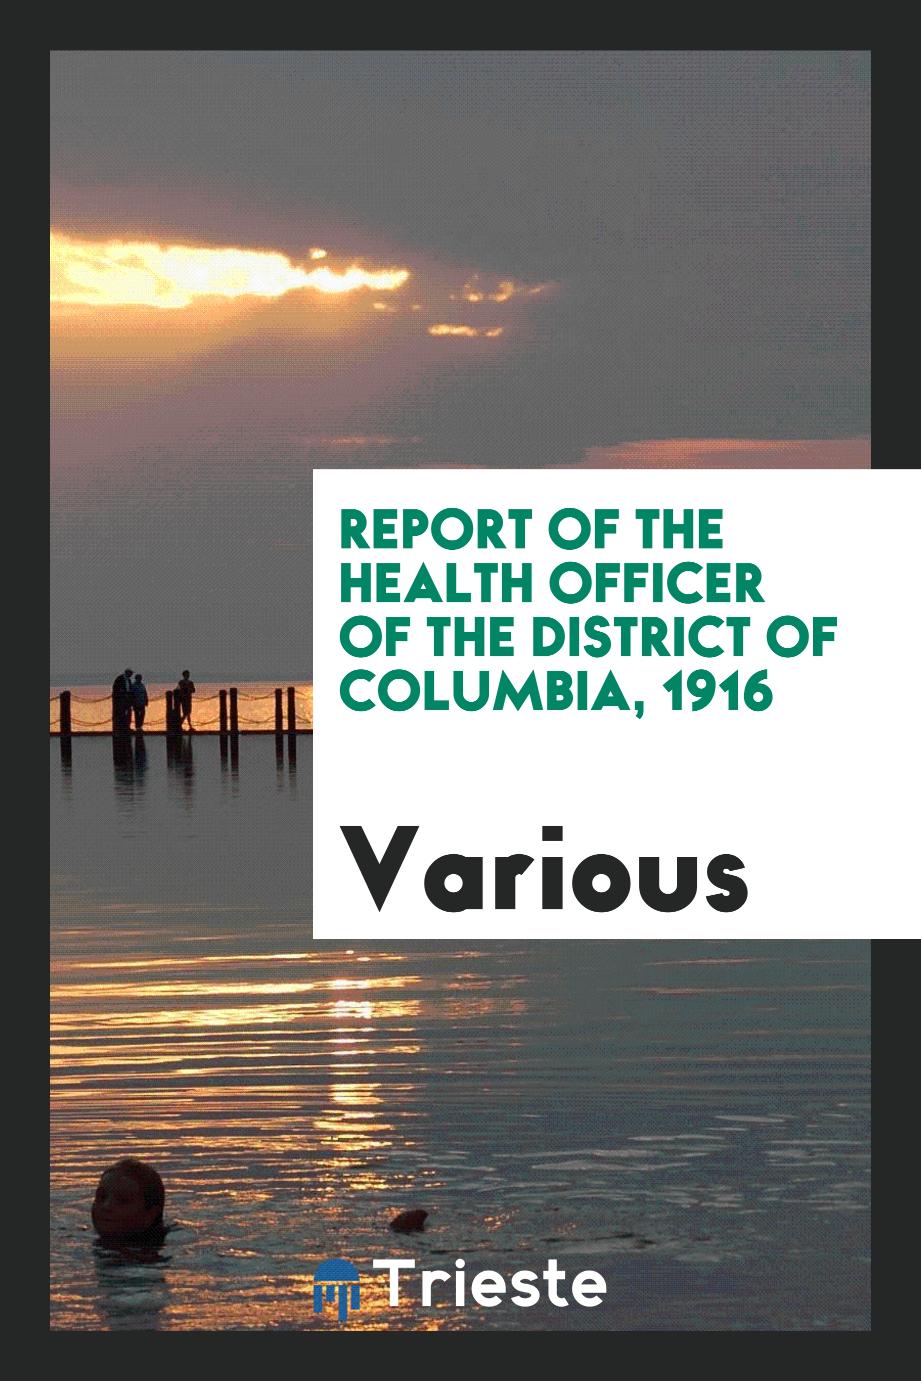 Report of the Health Officer of the District of Columbia, 1916